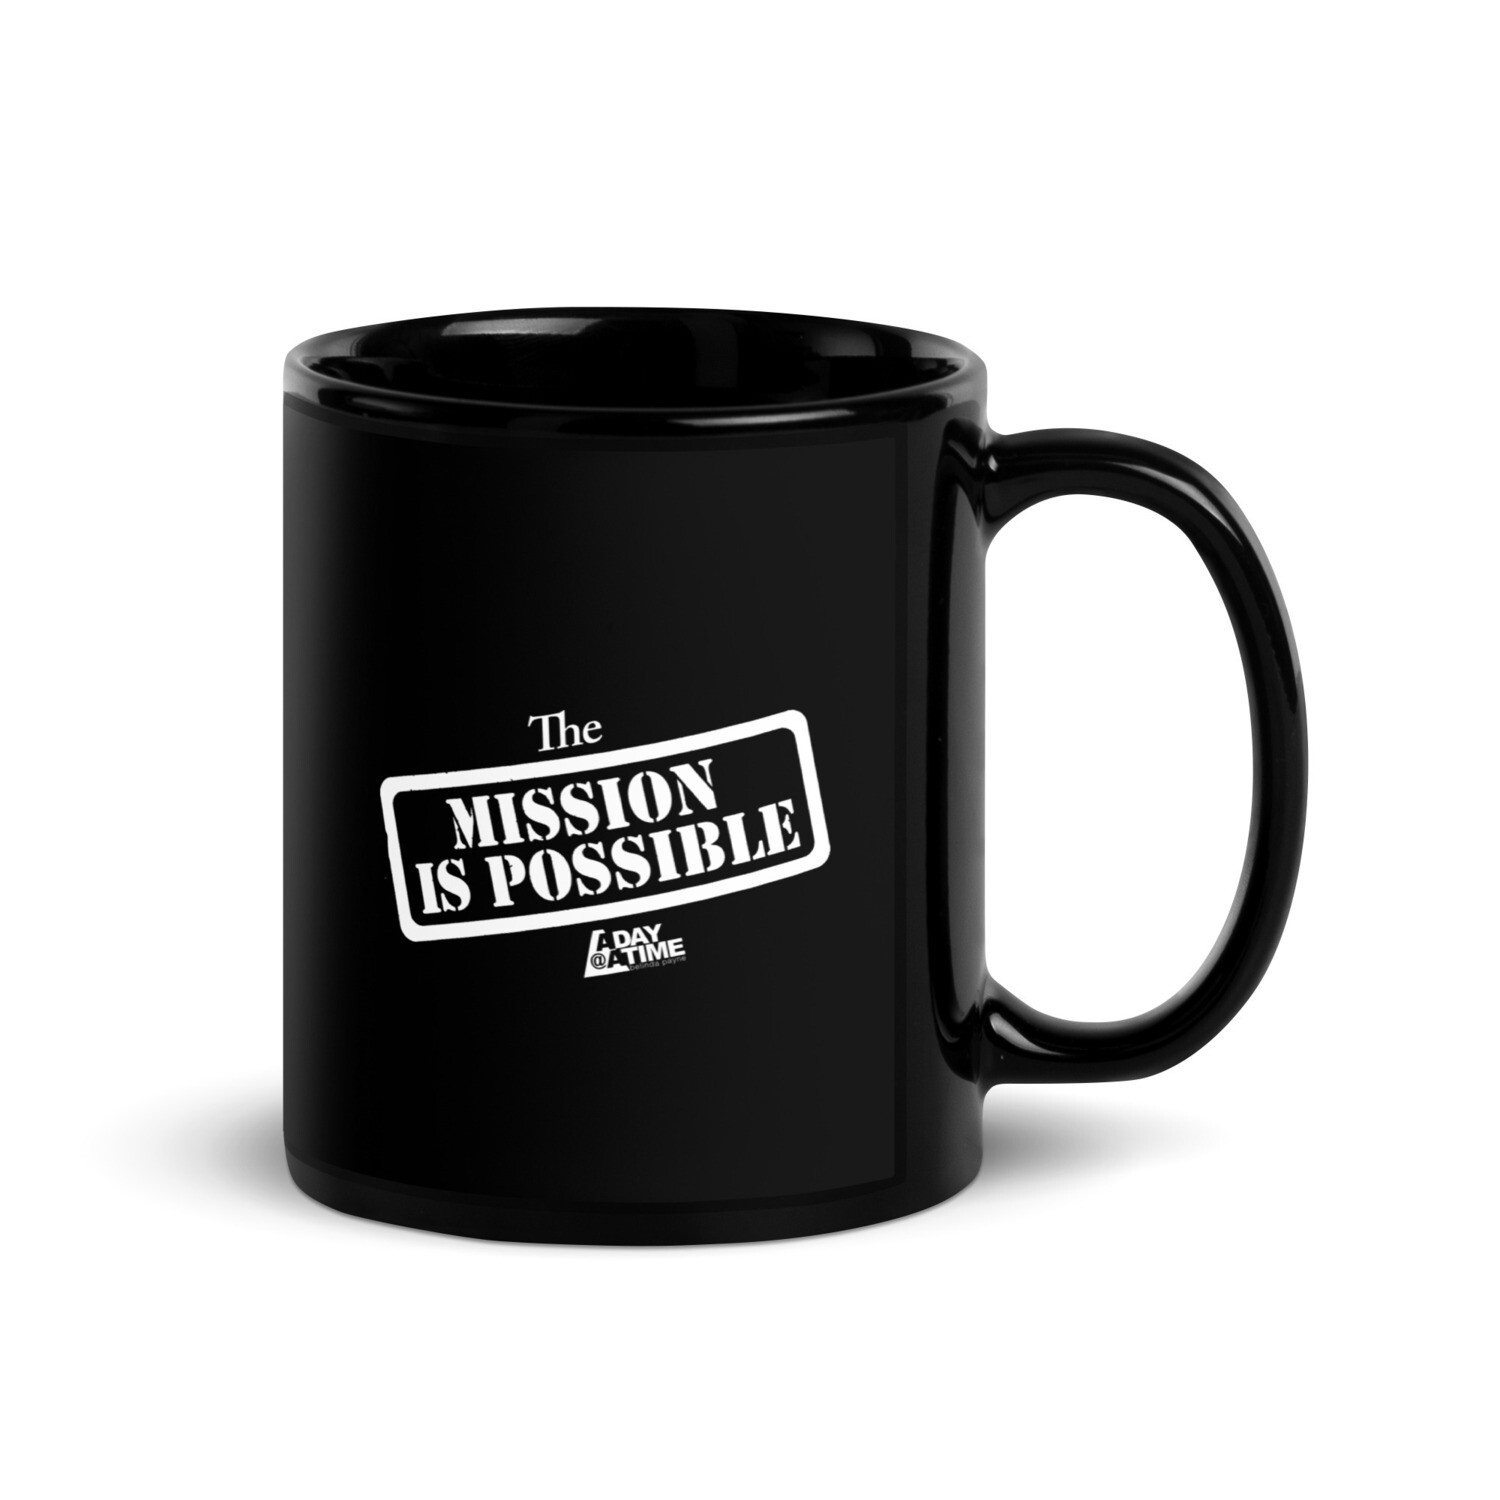 The Mission is Possible Mug